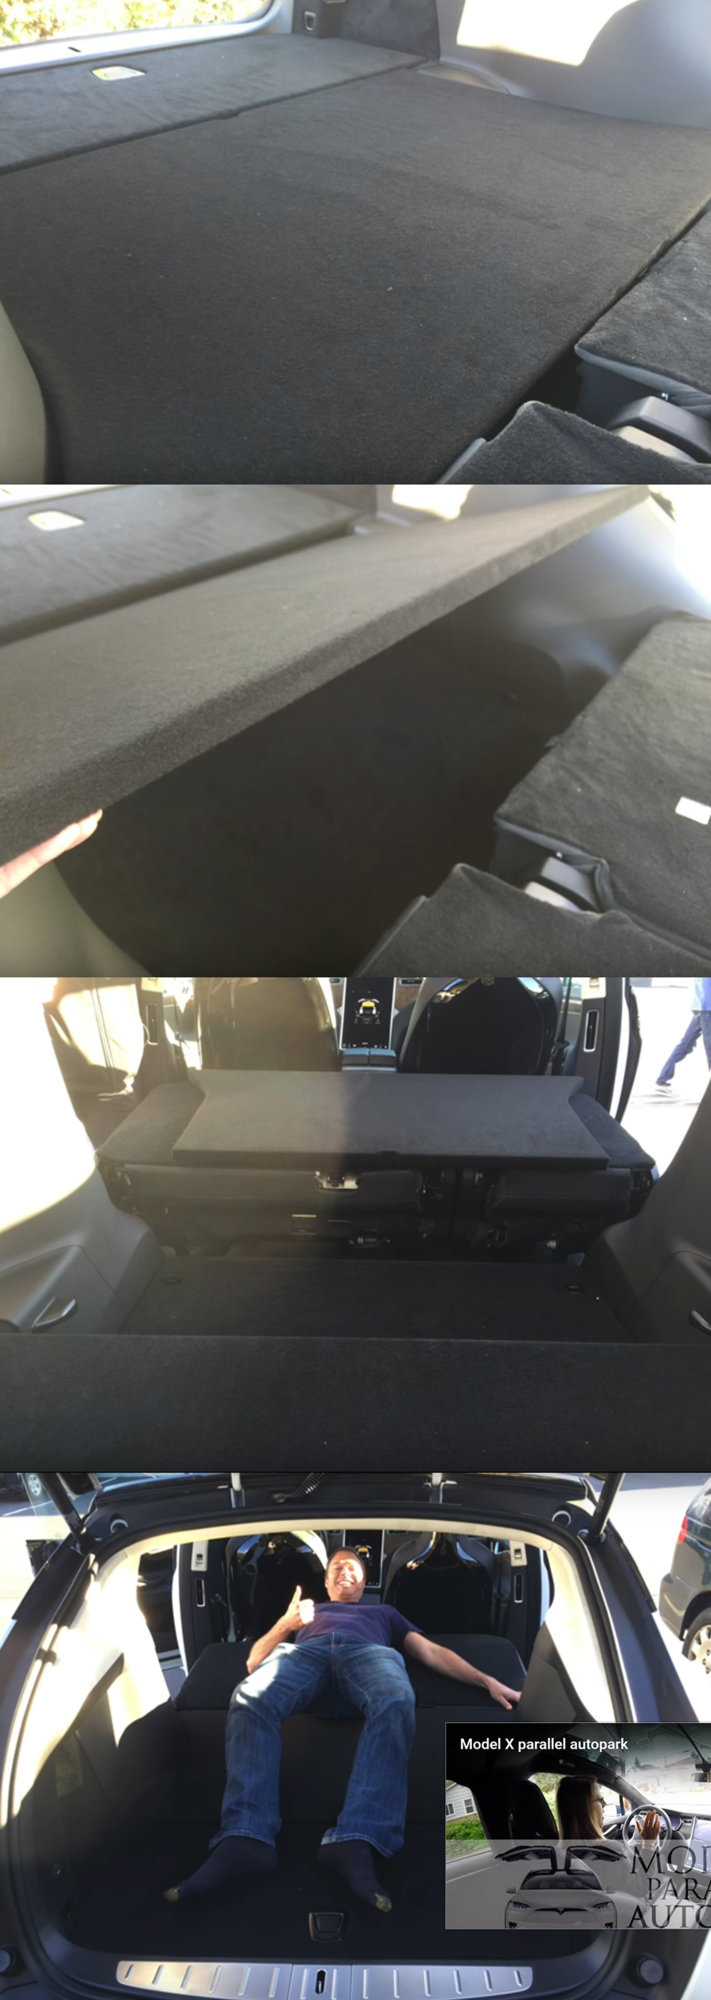 Evolution of the Model X 5-seater trunk